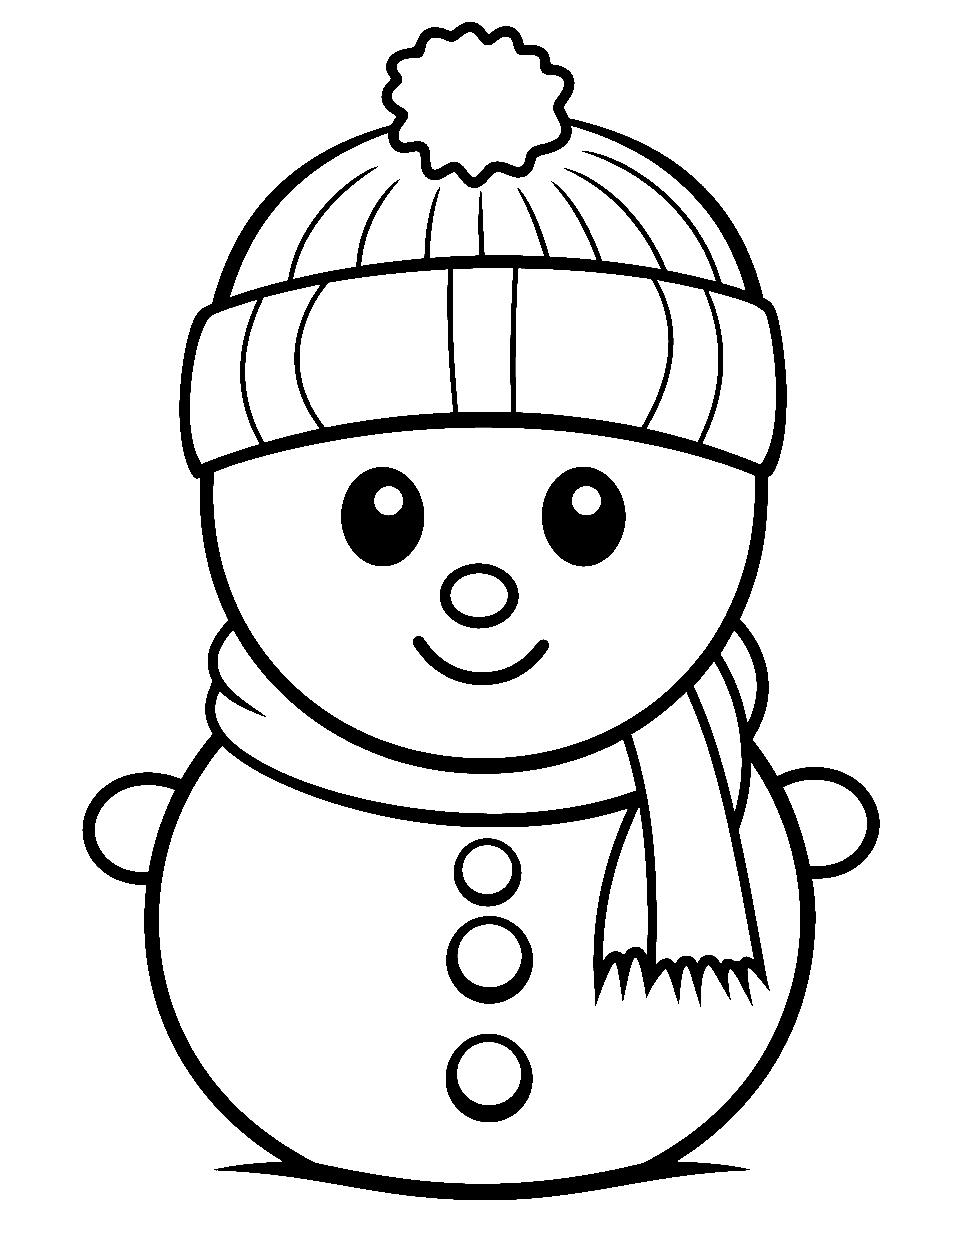 Kawaii-Style Snowman Coloring Page - An adorable, Kawaii stylized snowman with big eyes and a cute expression.